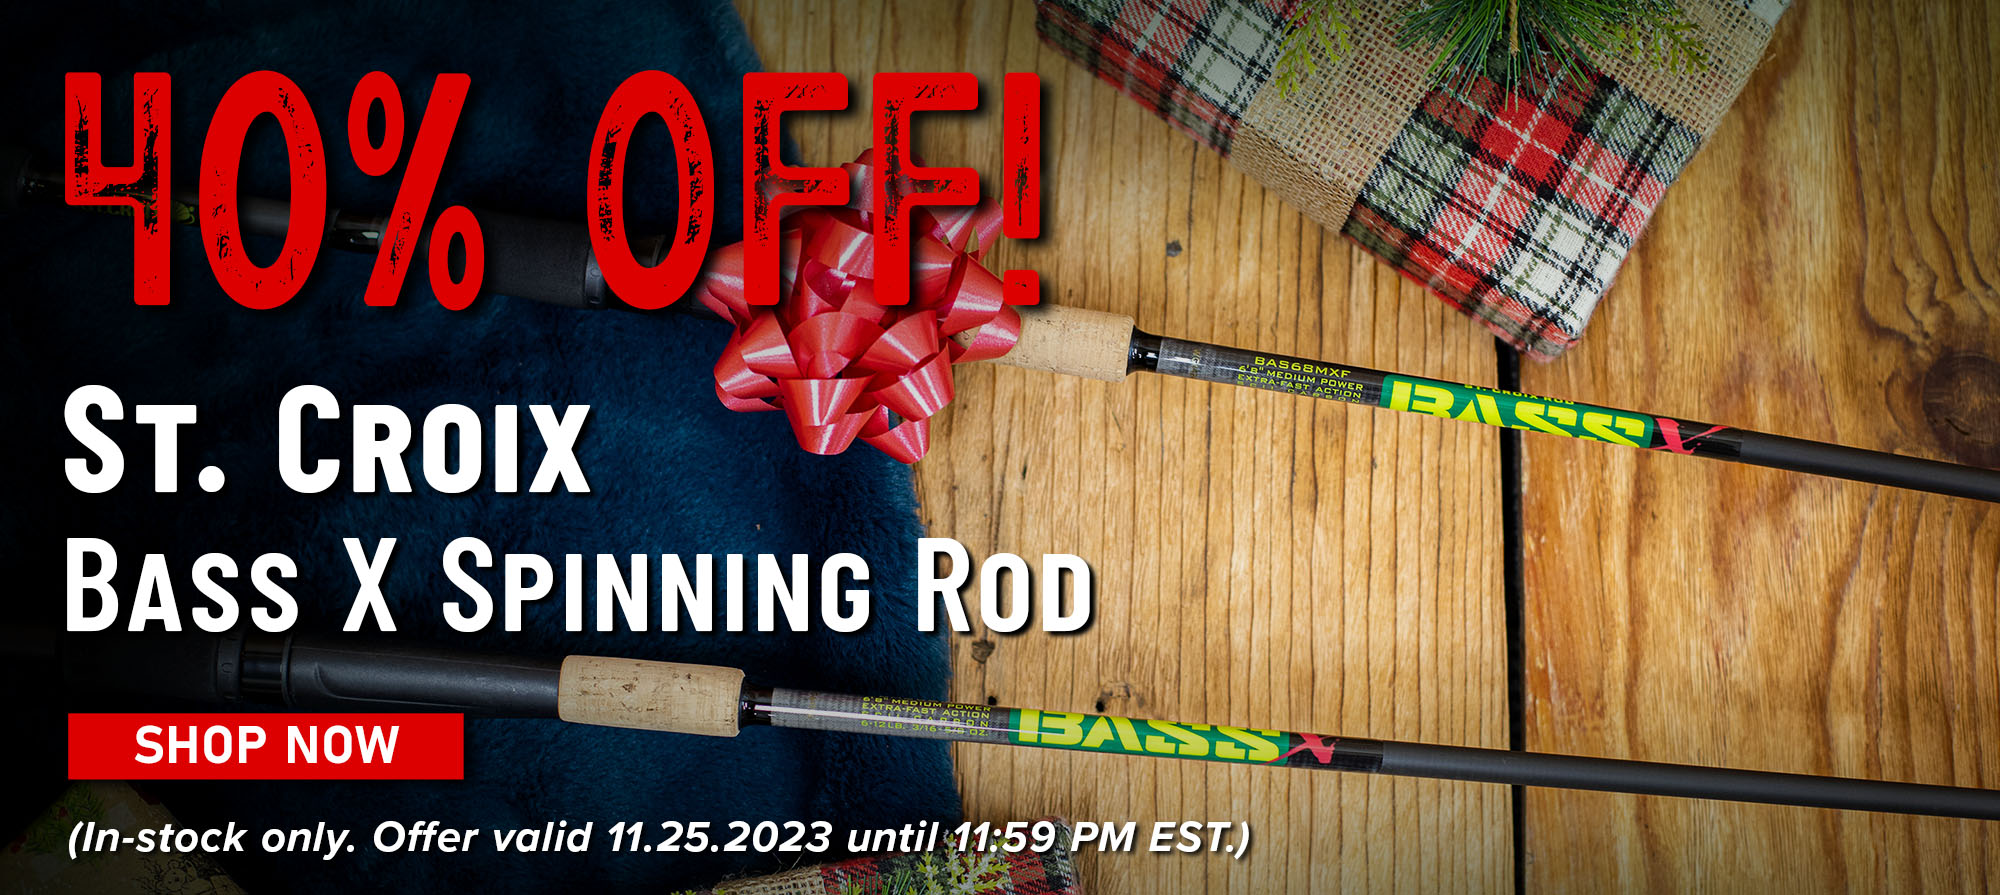 40% Off! St. Croix Bass X Spinning Rod Shop Now (In-stock only. Offer valid 11.25.2023 until 11:59 PM EST.)